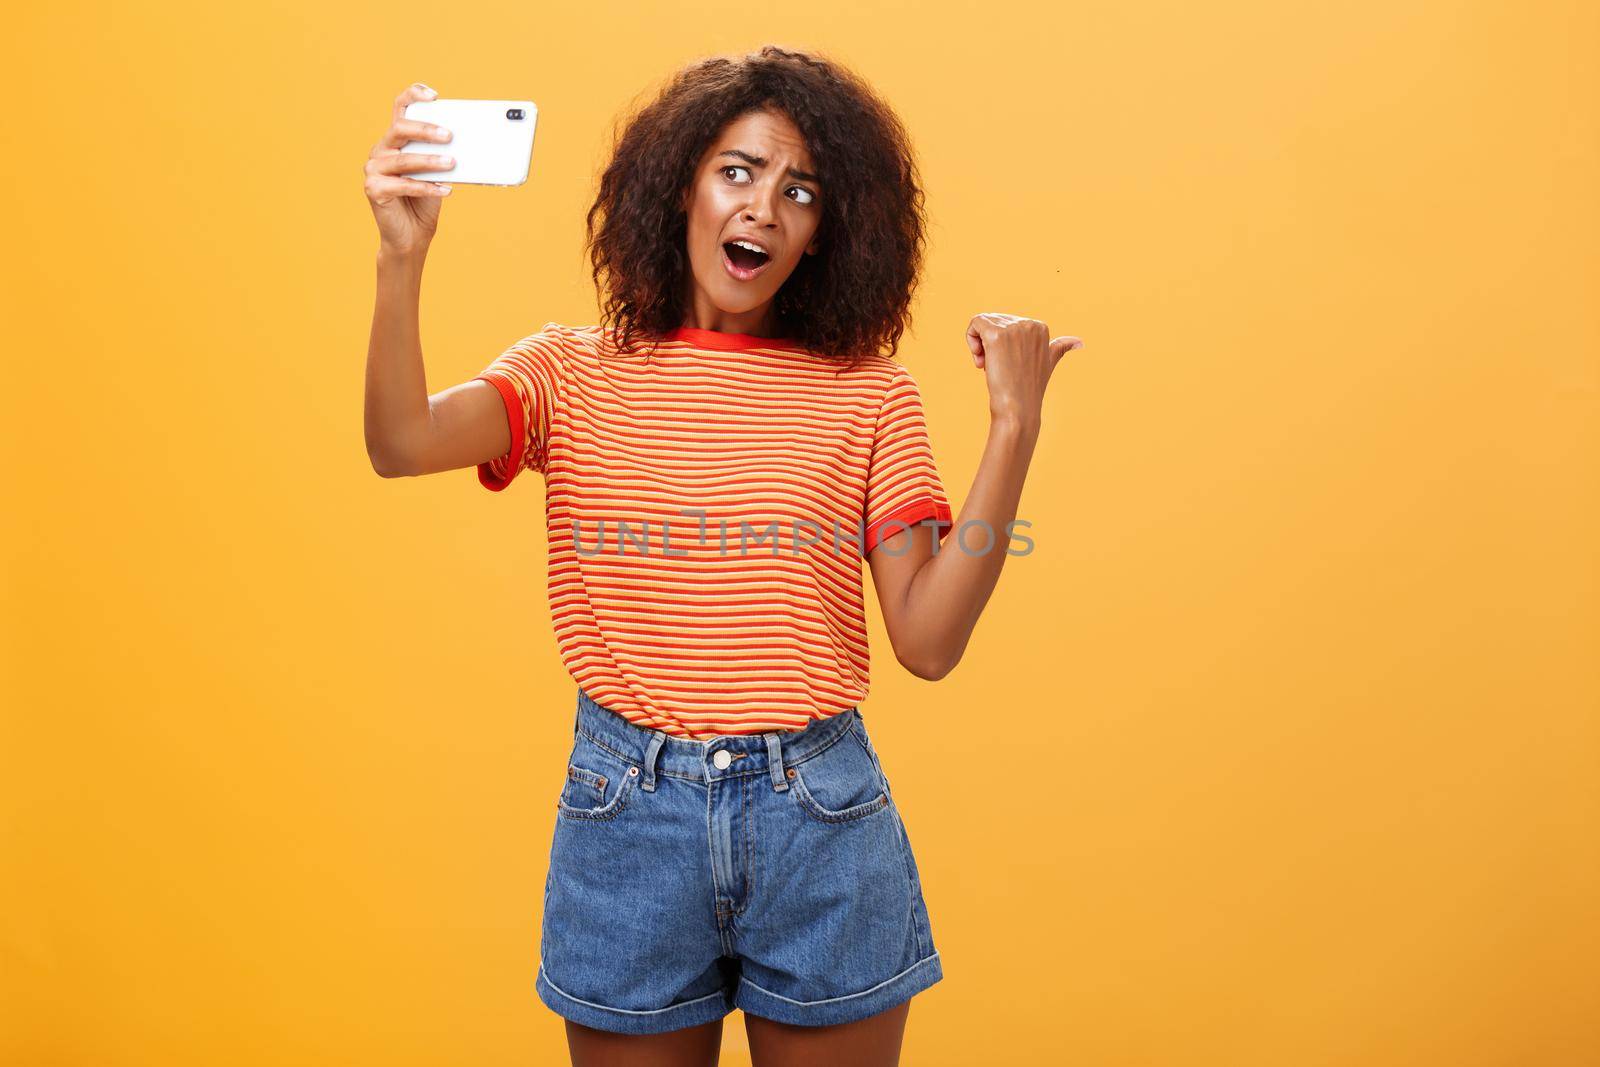 Woman recording video blog pointing at strange object behind her. Portrait of concerned and curious stylish famous internet star holding smartphone talking in cellphone camera over orange background. Technology concept